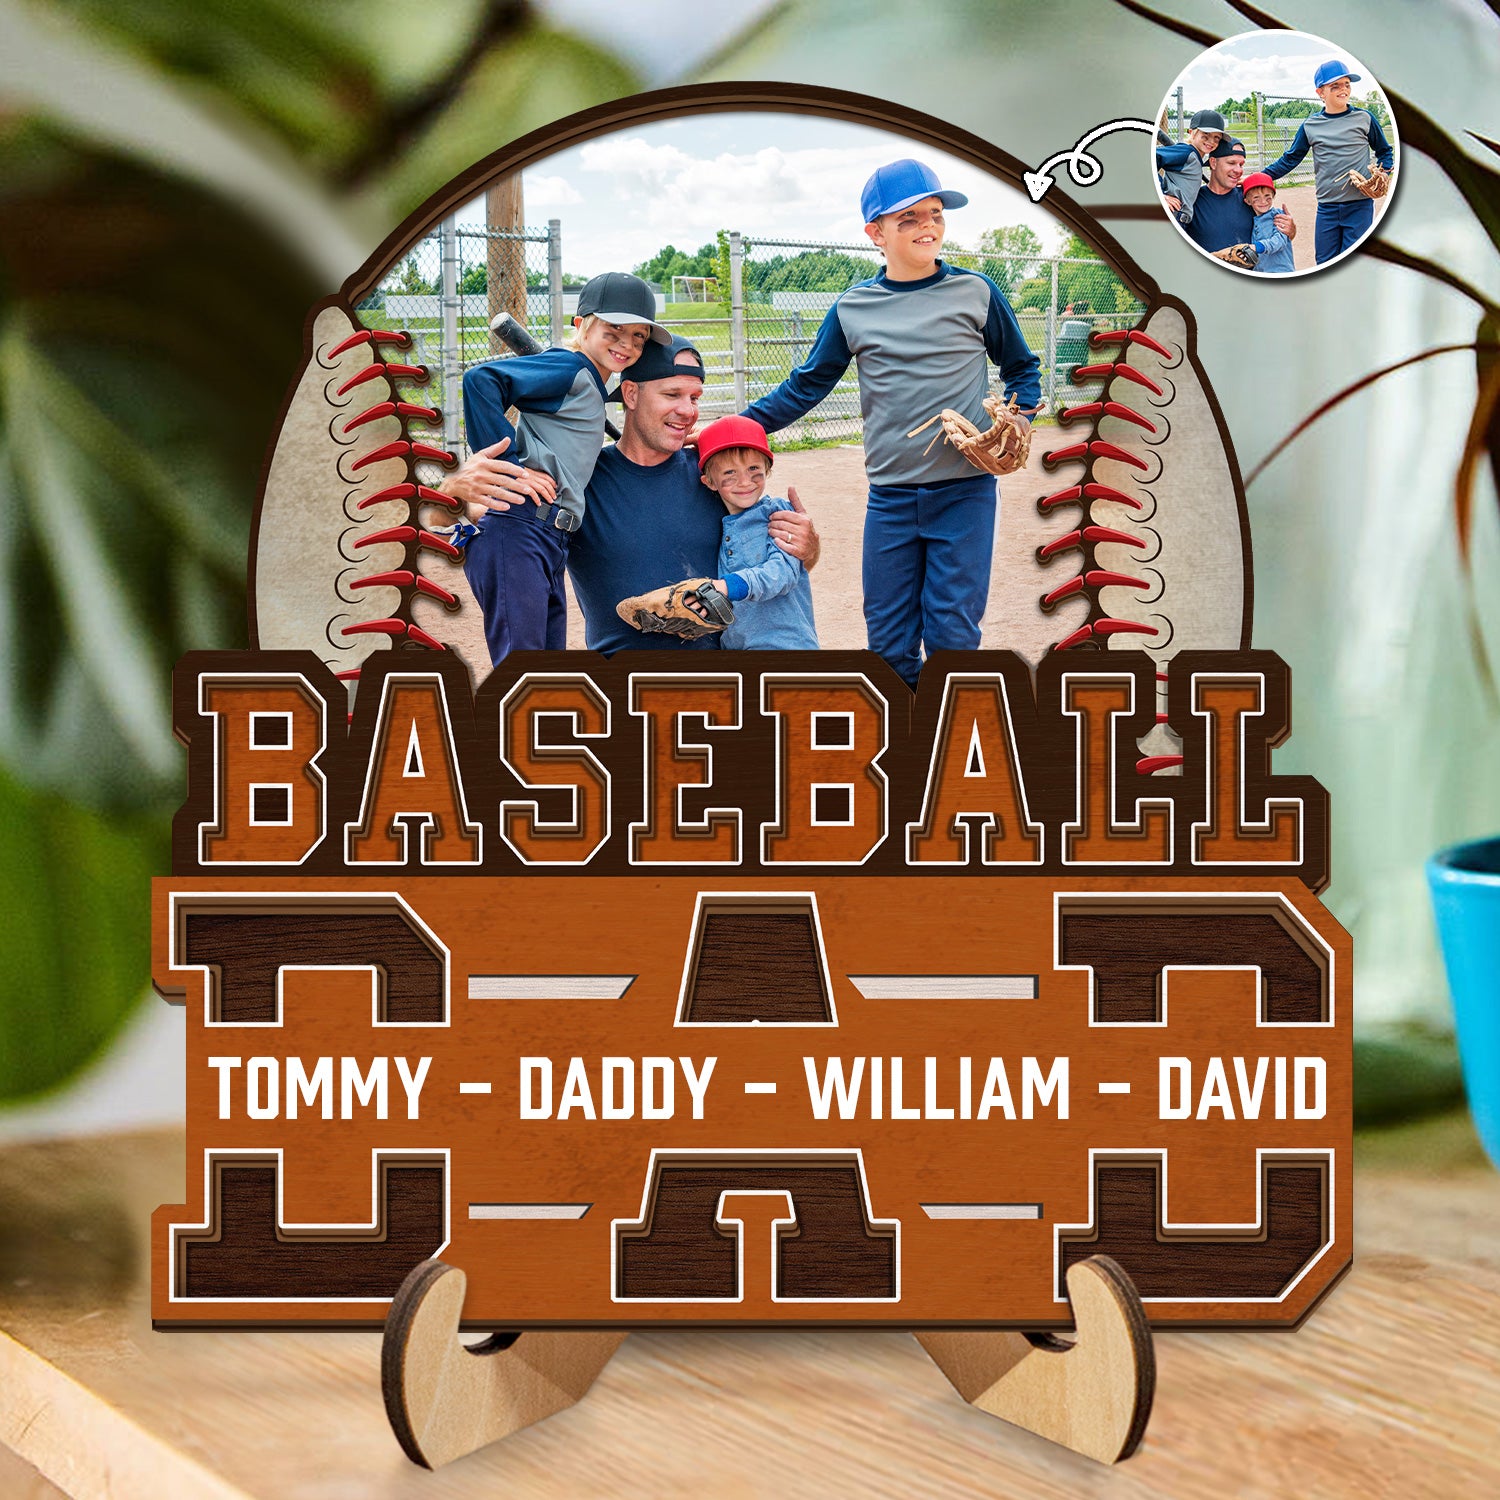 Custom Photo Baseball Dad We Love You - Gift For Family, Father, Sport Fans - Personalized 2-Layered Wooden Plaque With Stand